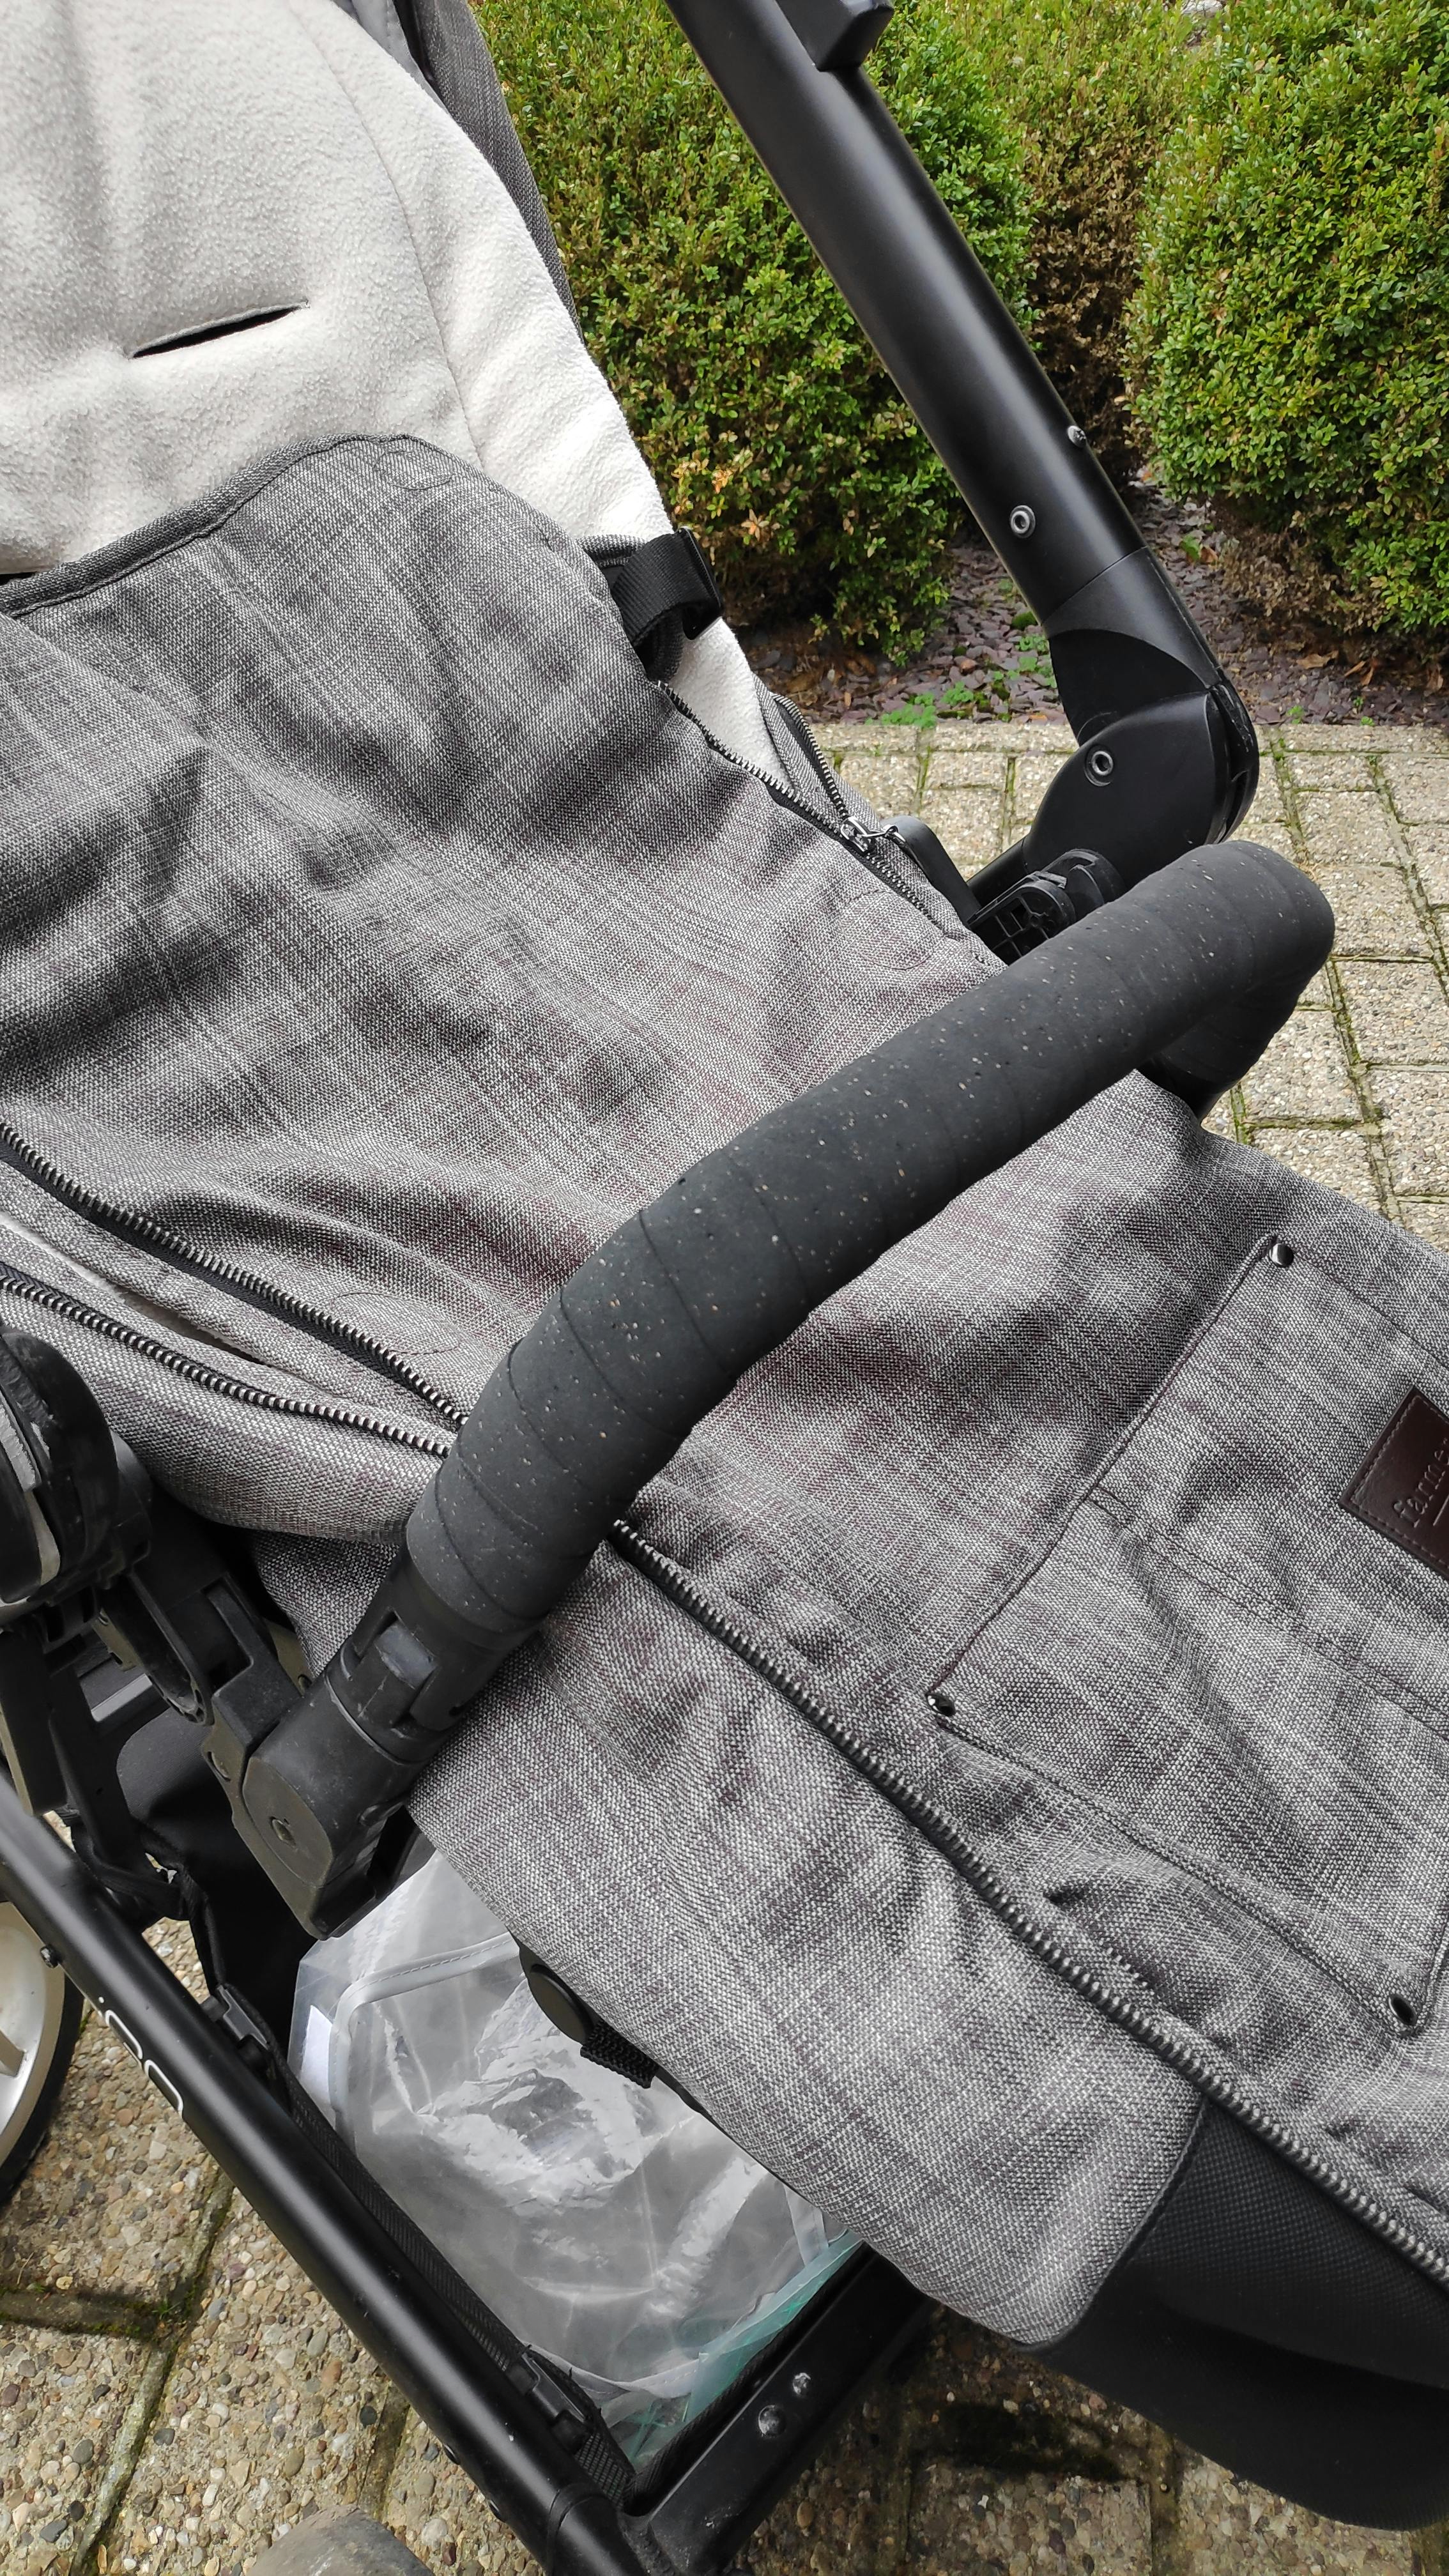 Stroller repair, cycling skills to the rescue